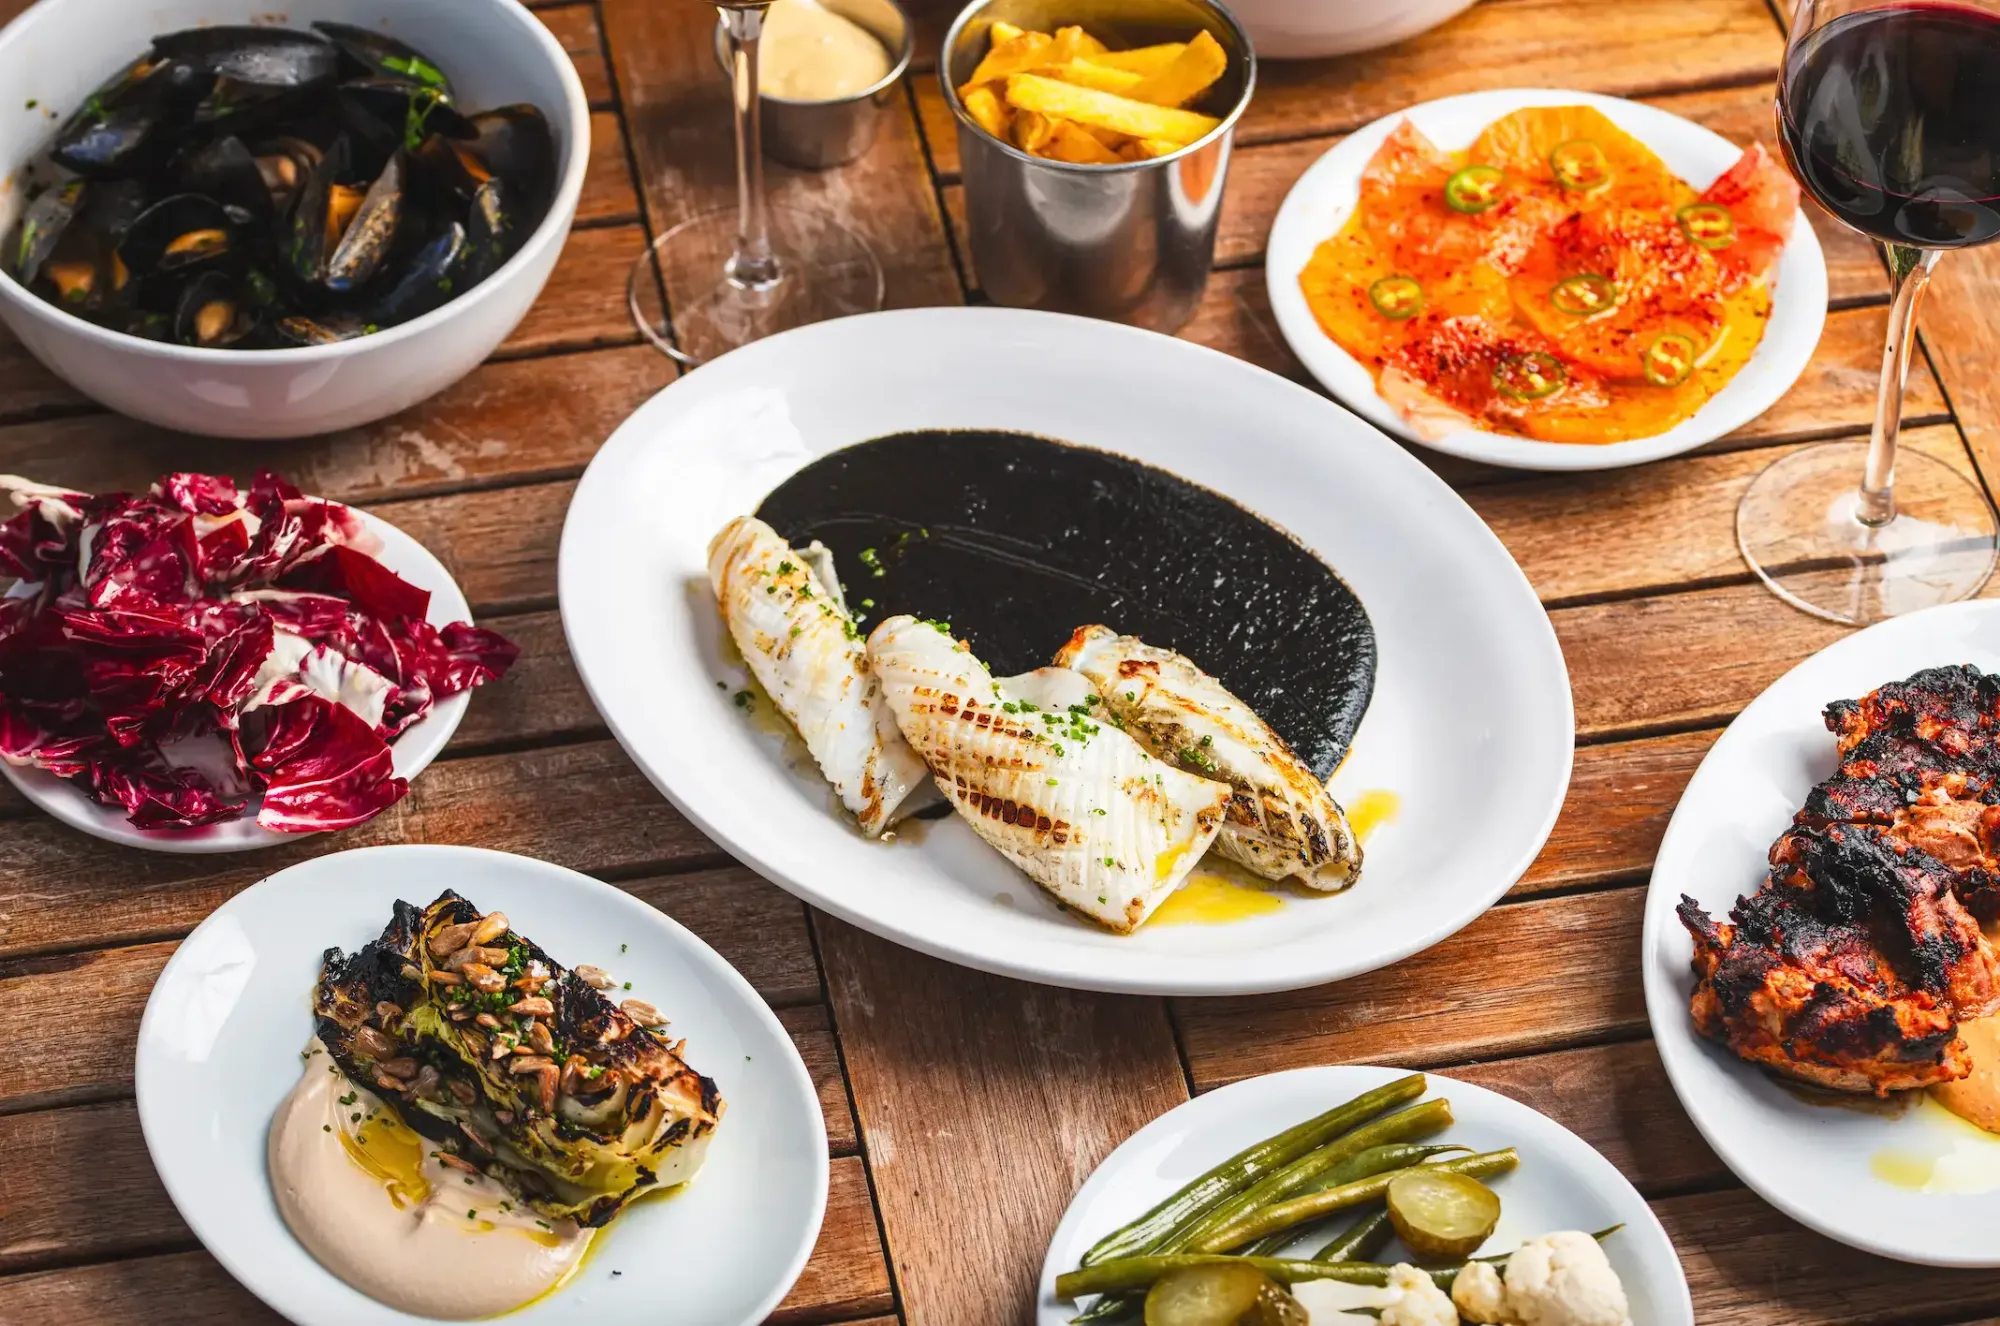 TT, Shoreditch - 40% off food every Tues-Sat until 18th May